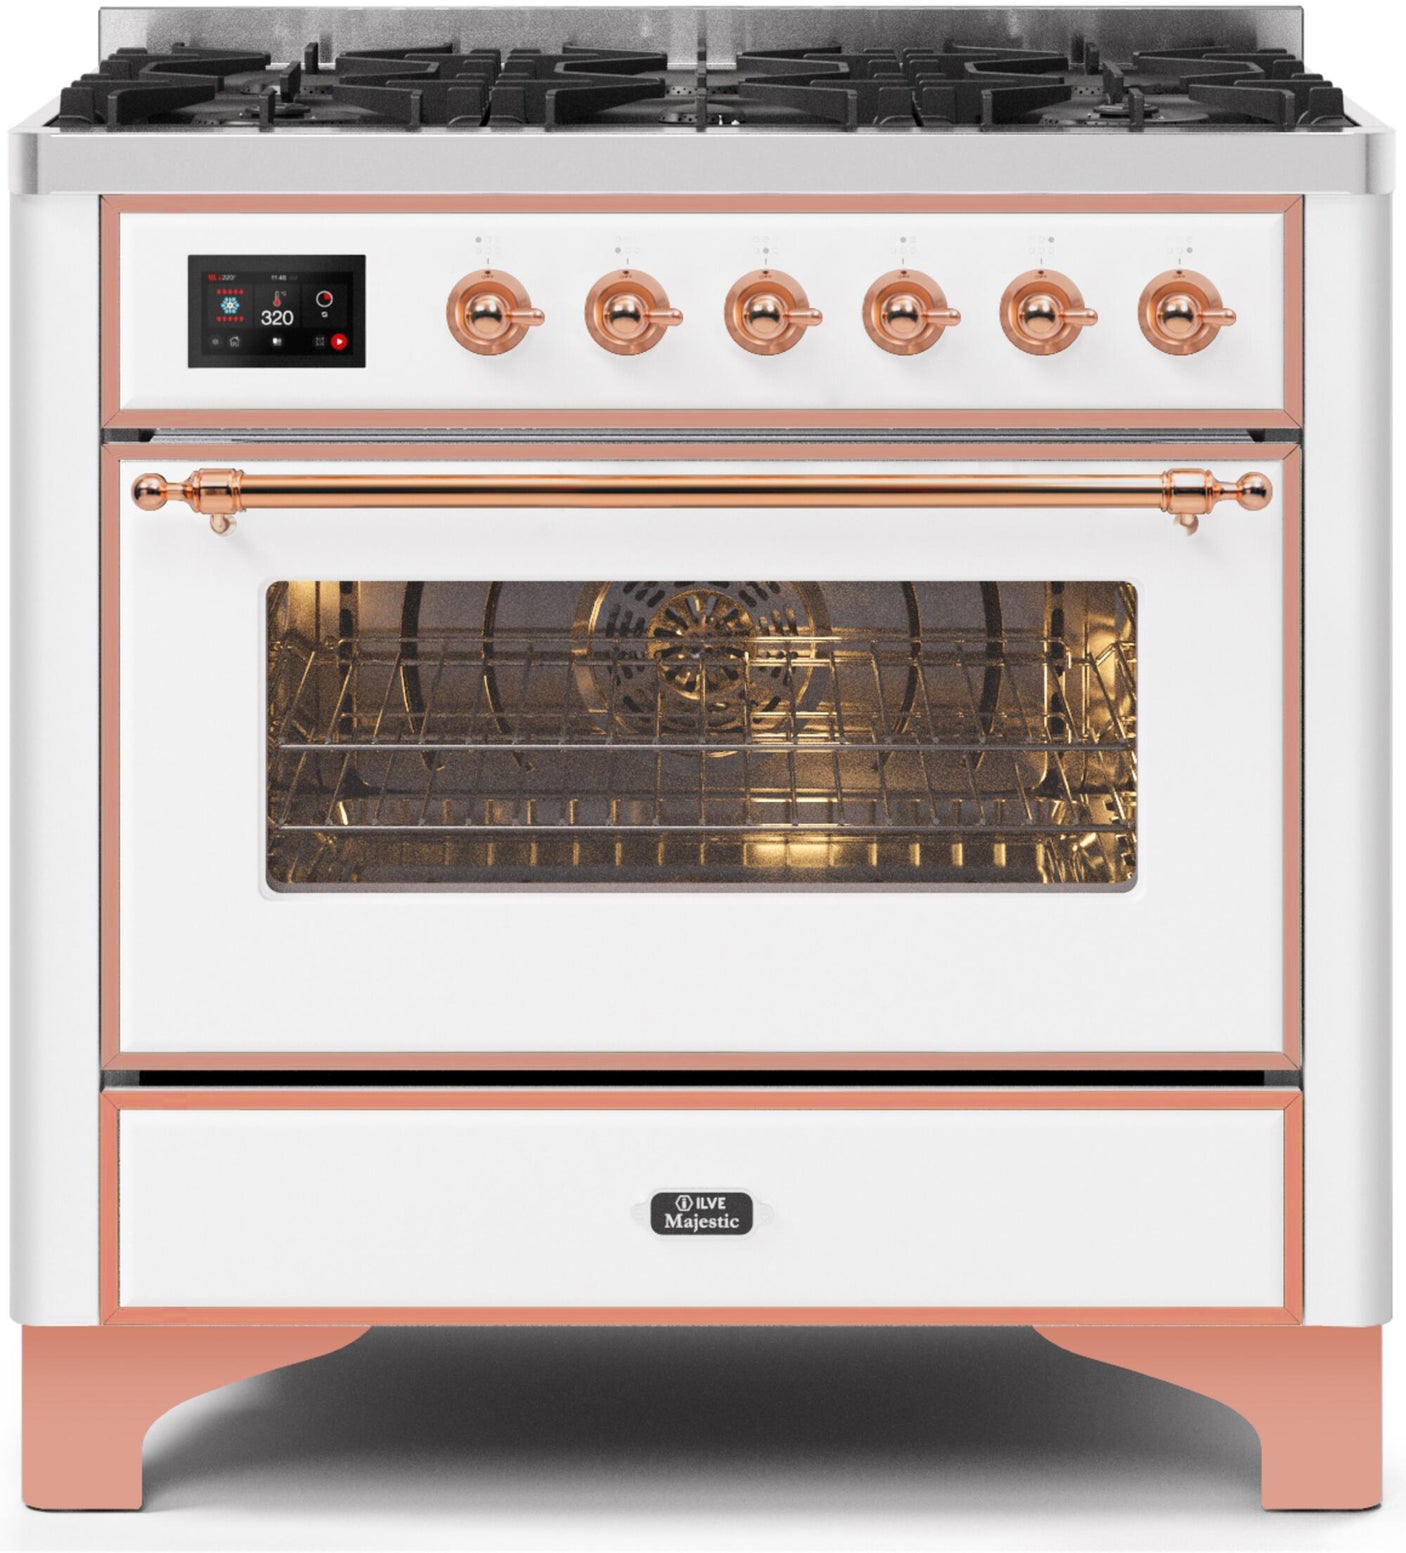 36" Majestic II Series Freestanding Dual Fuel Single Oven Range with 6 Sealed Burners, Triple Glass Cool Door, Convection Oven, TFT Oven Control Display and Child Lock in White